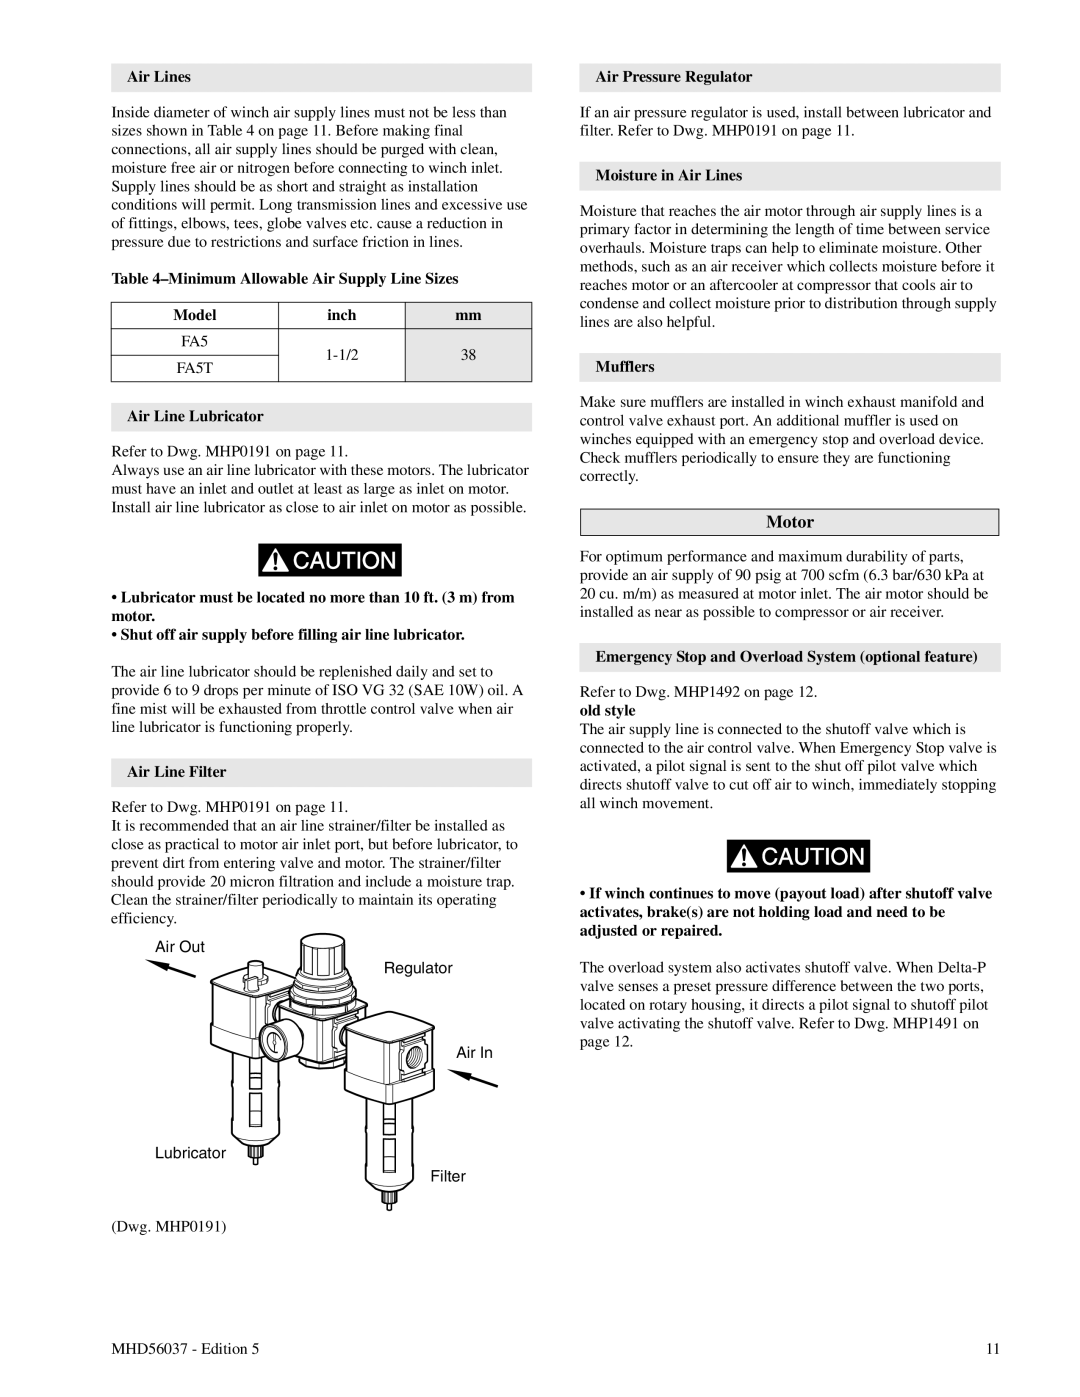 Ingersoll-Rand FA5T Motor, Air Lines, Minimum Allowable Air Supply Line Sizes, Model, inch, 1-1/2, Air Line Lubricator 